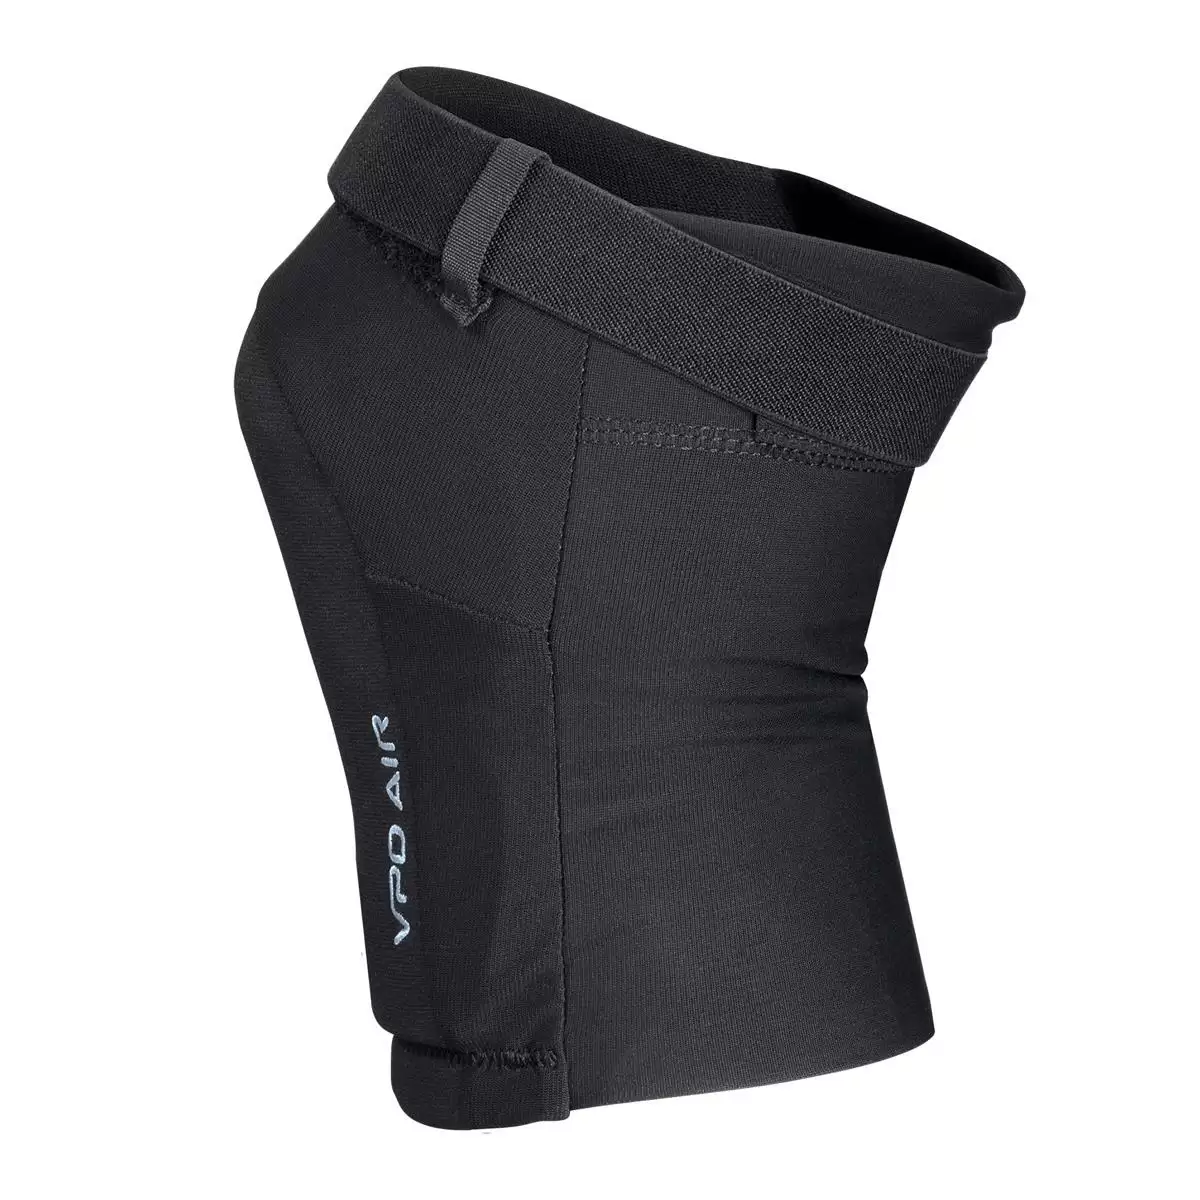 Joint VPD Air Knee pads black Size S #3